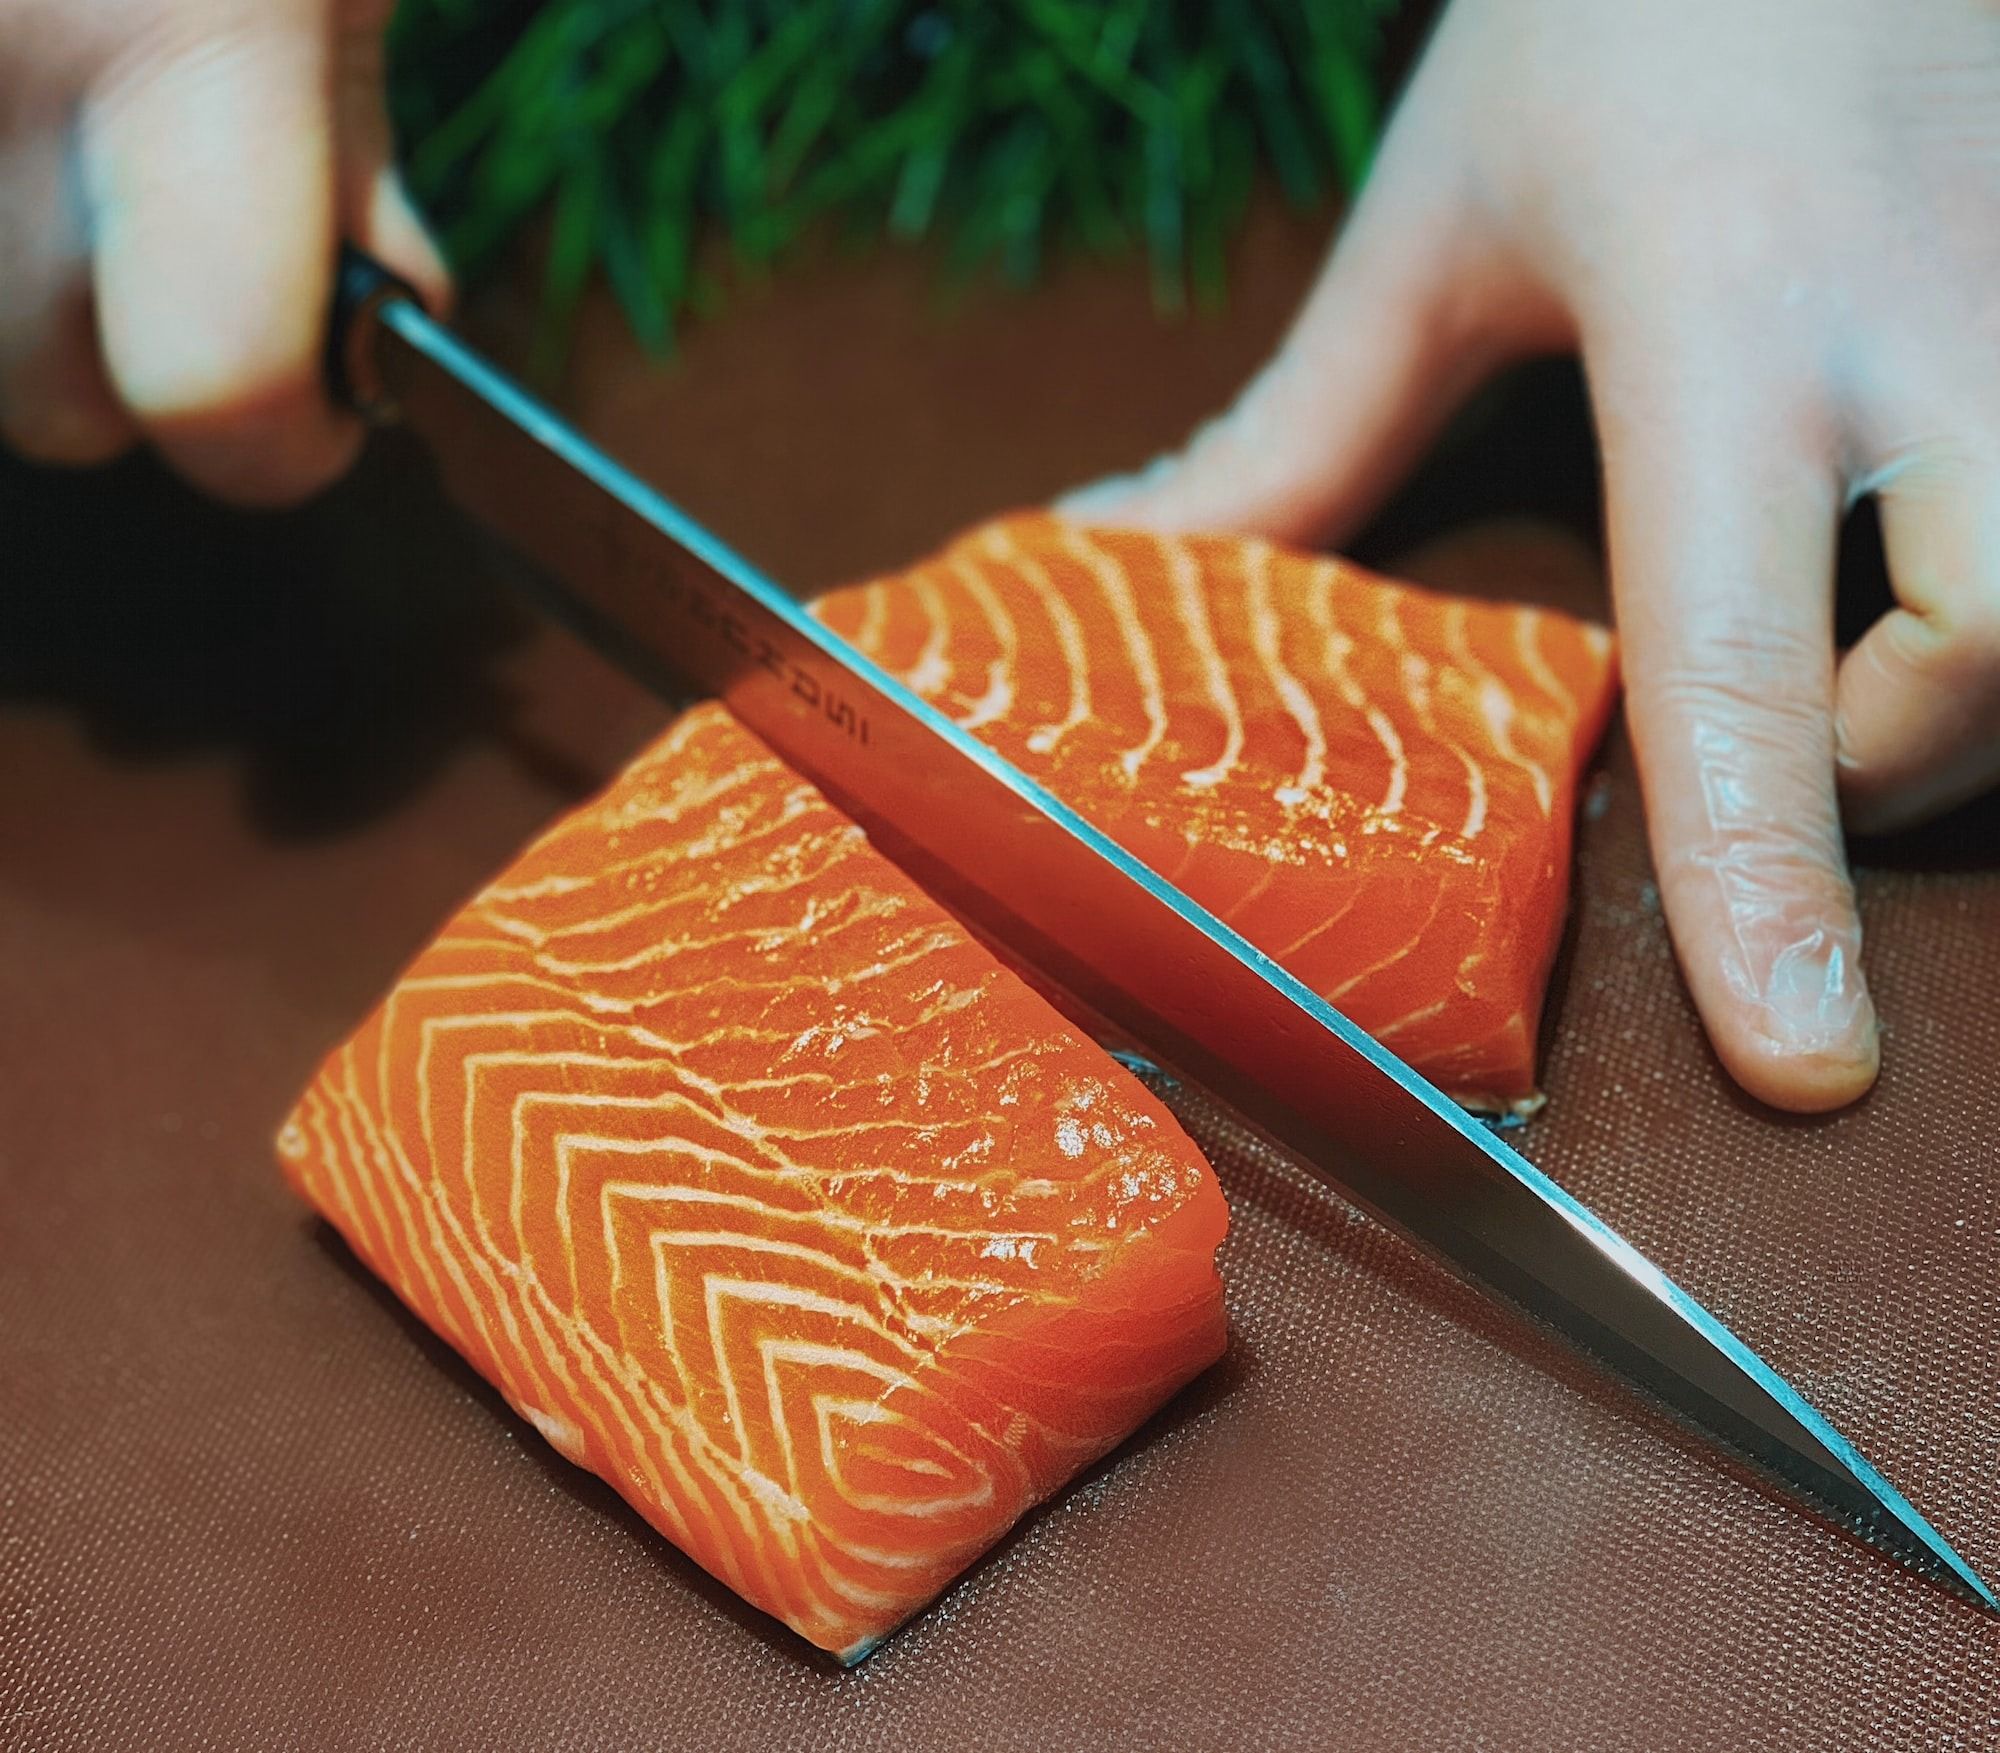 Salmon being sliced into half